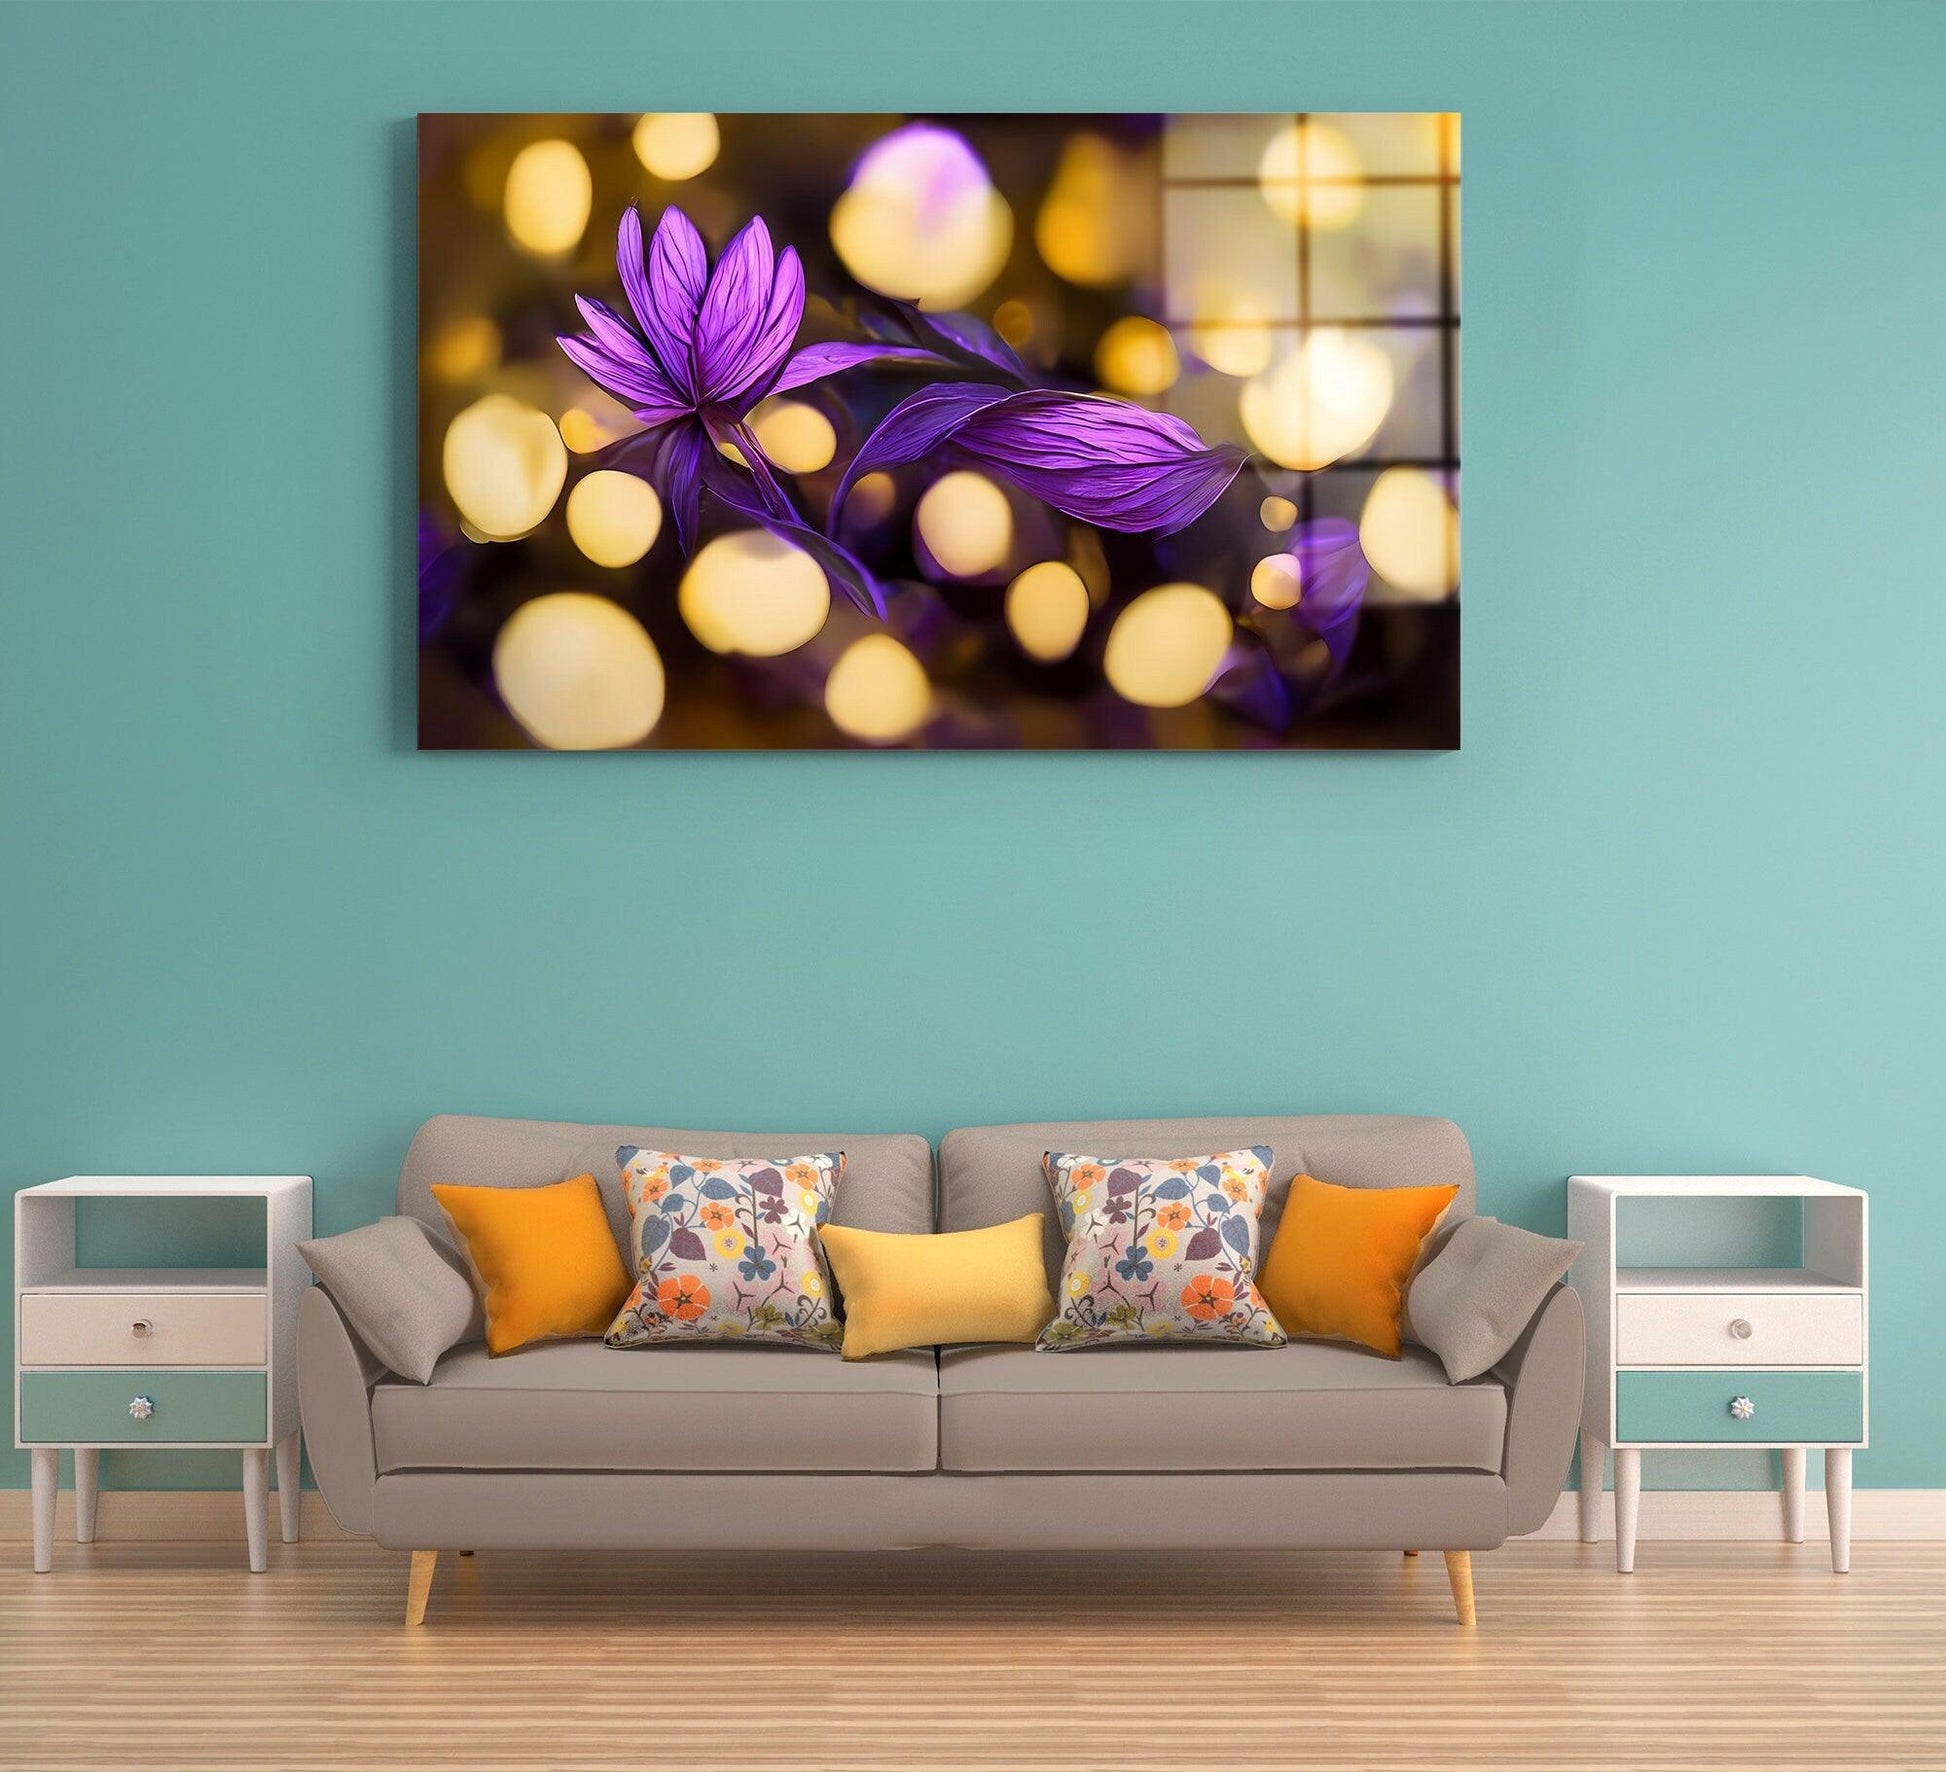 Turkish Carnation Flower Purple Canvas Wall Art Design | Poster Print Decor for Home & Office Decoration I POSTER or CANVAS READY to Hang - TrendiArt